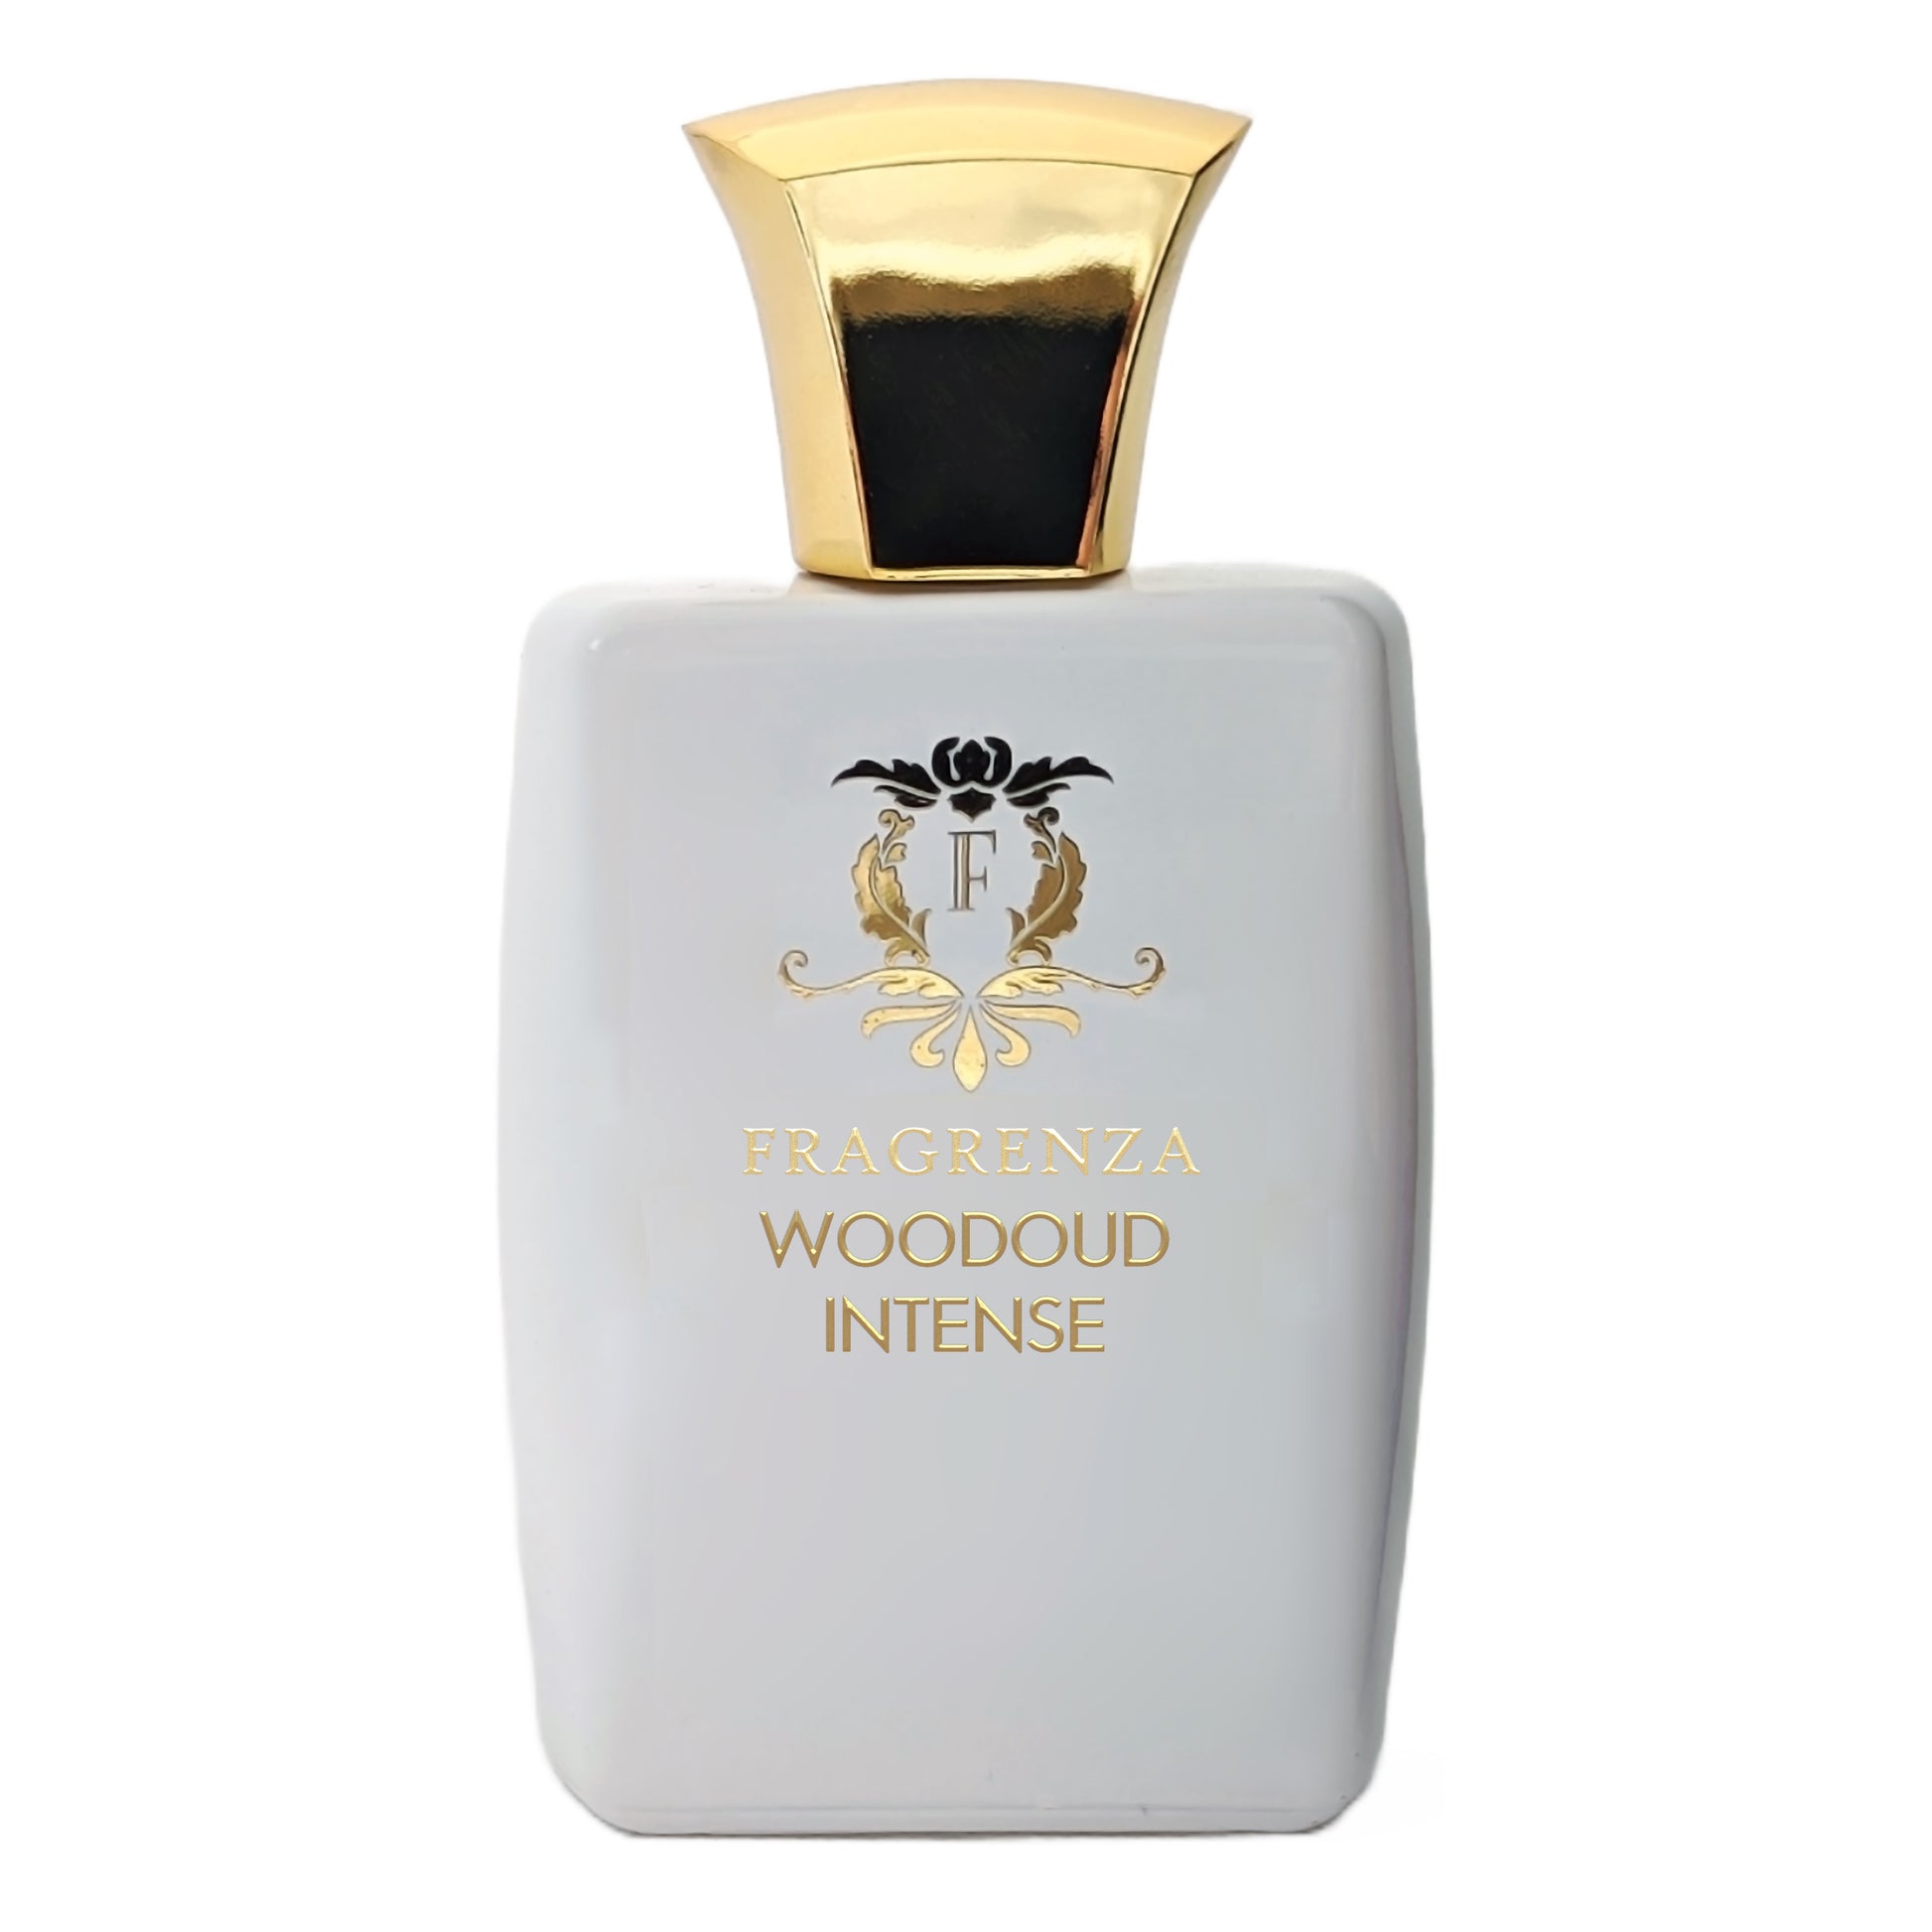 Oud Wood Intense dupe